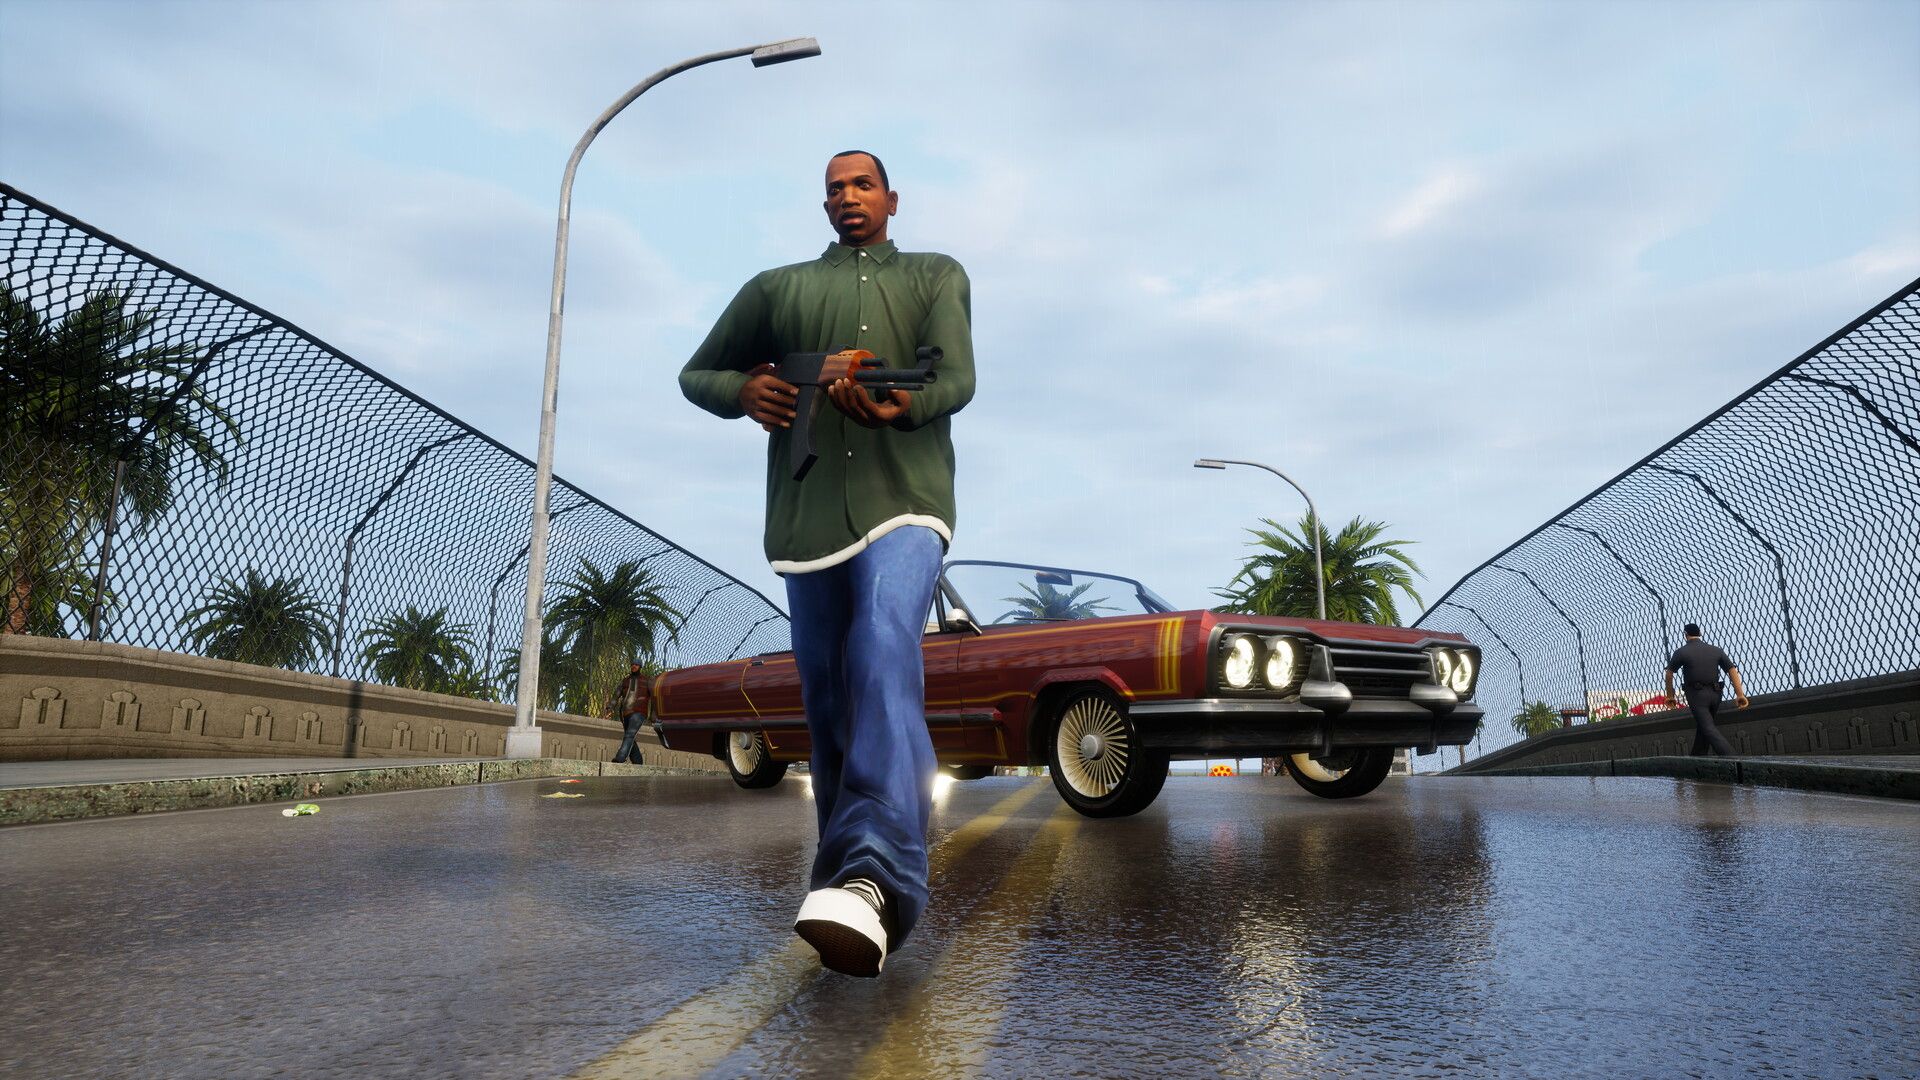 You Can Now Play 3 Classic 'Grand Theft Auto' Games on Netflix